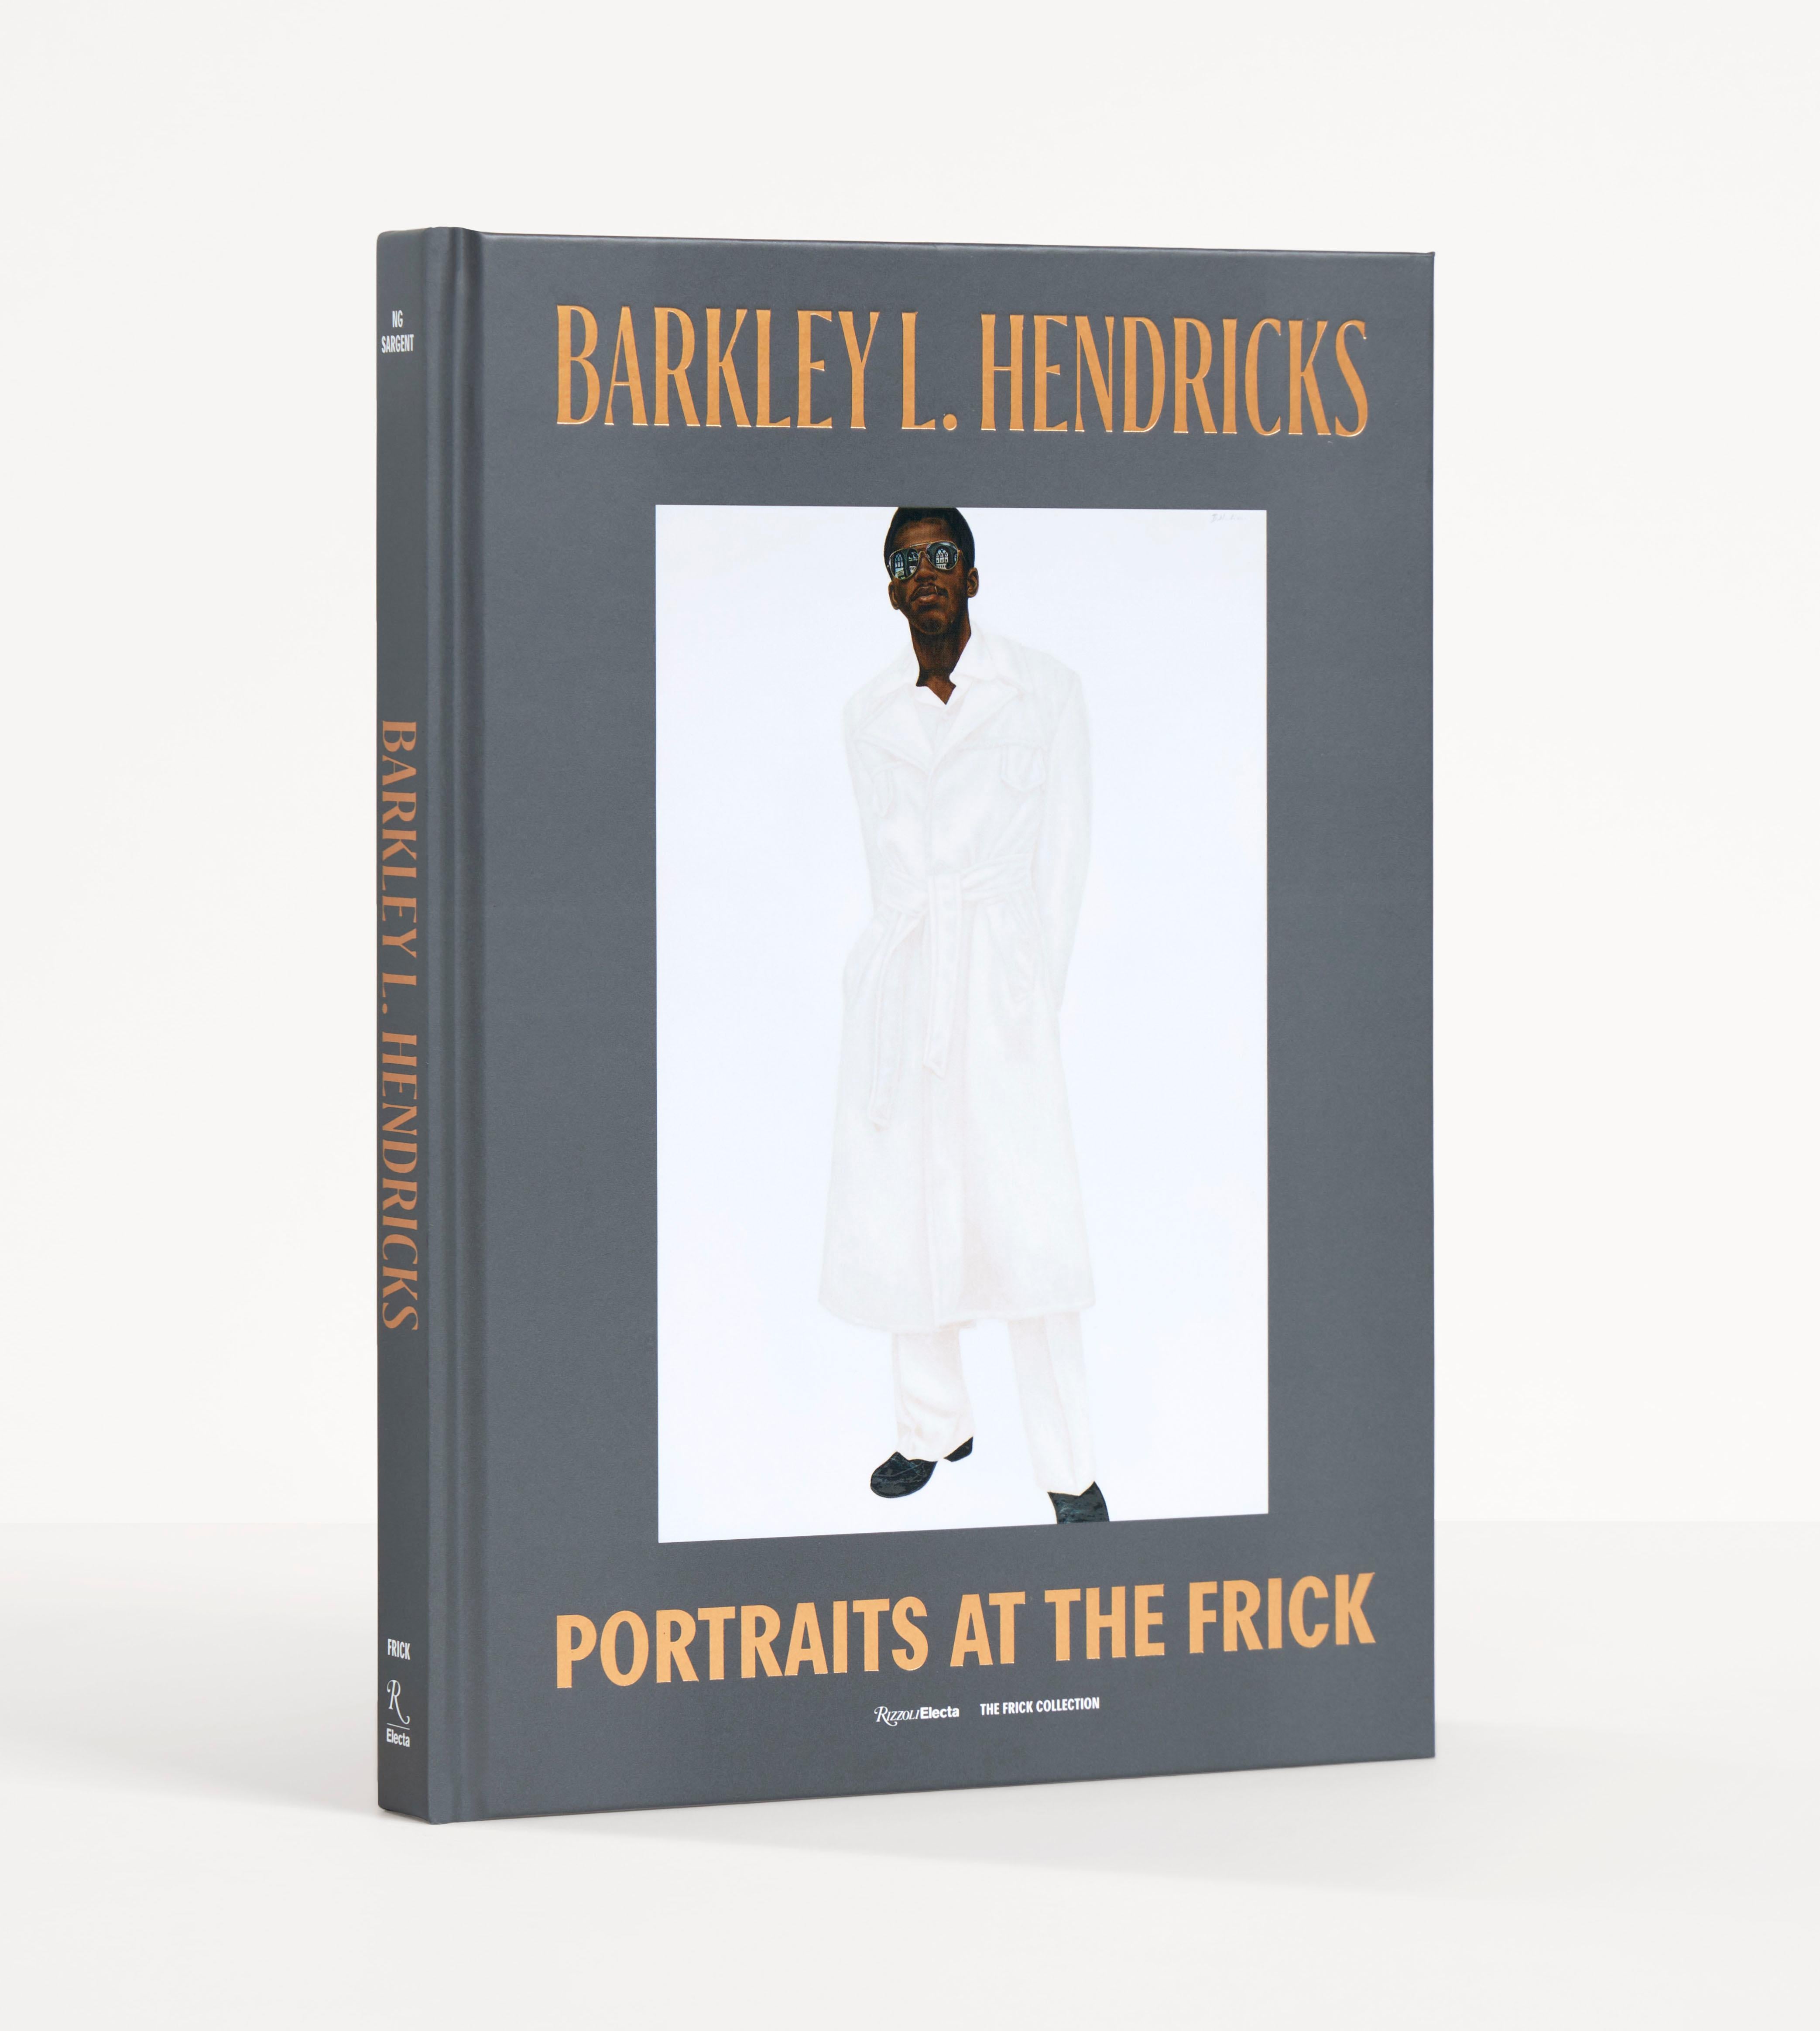 American artist Barkley L. Hendricks (1945–2017) revolutionized contemporary portraiture with his vivid depictions of Black subjects beginning in the late 1960s. This book contextualizes Hendricks’s portraits at different stages of the country’s